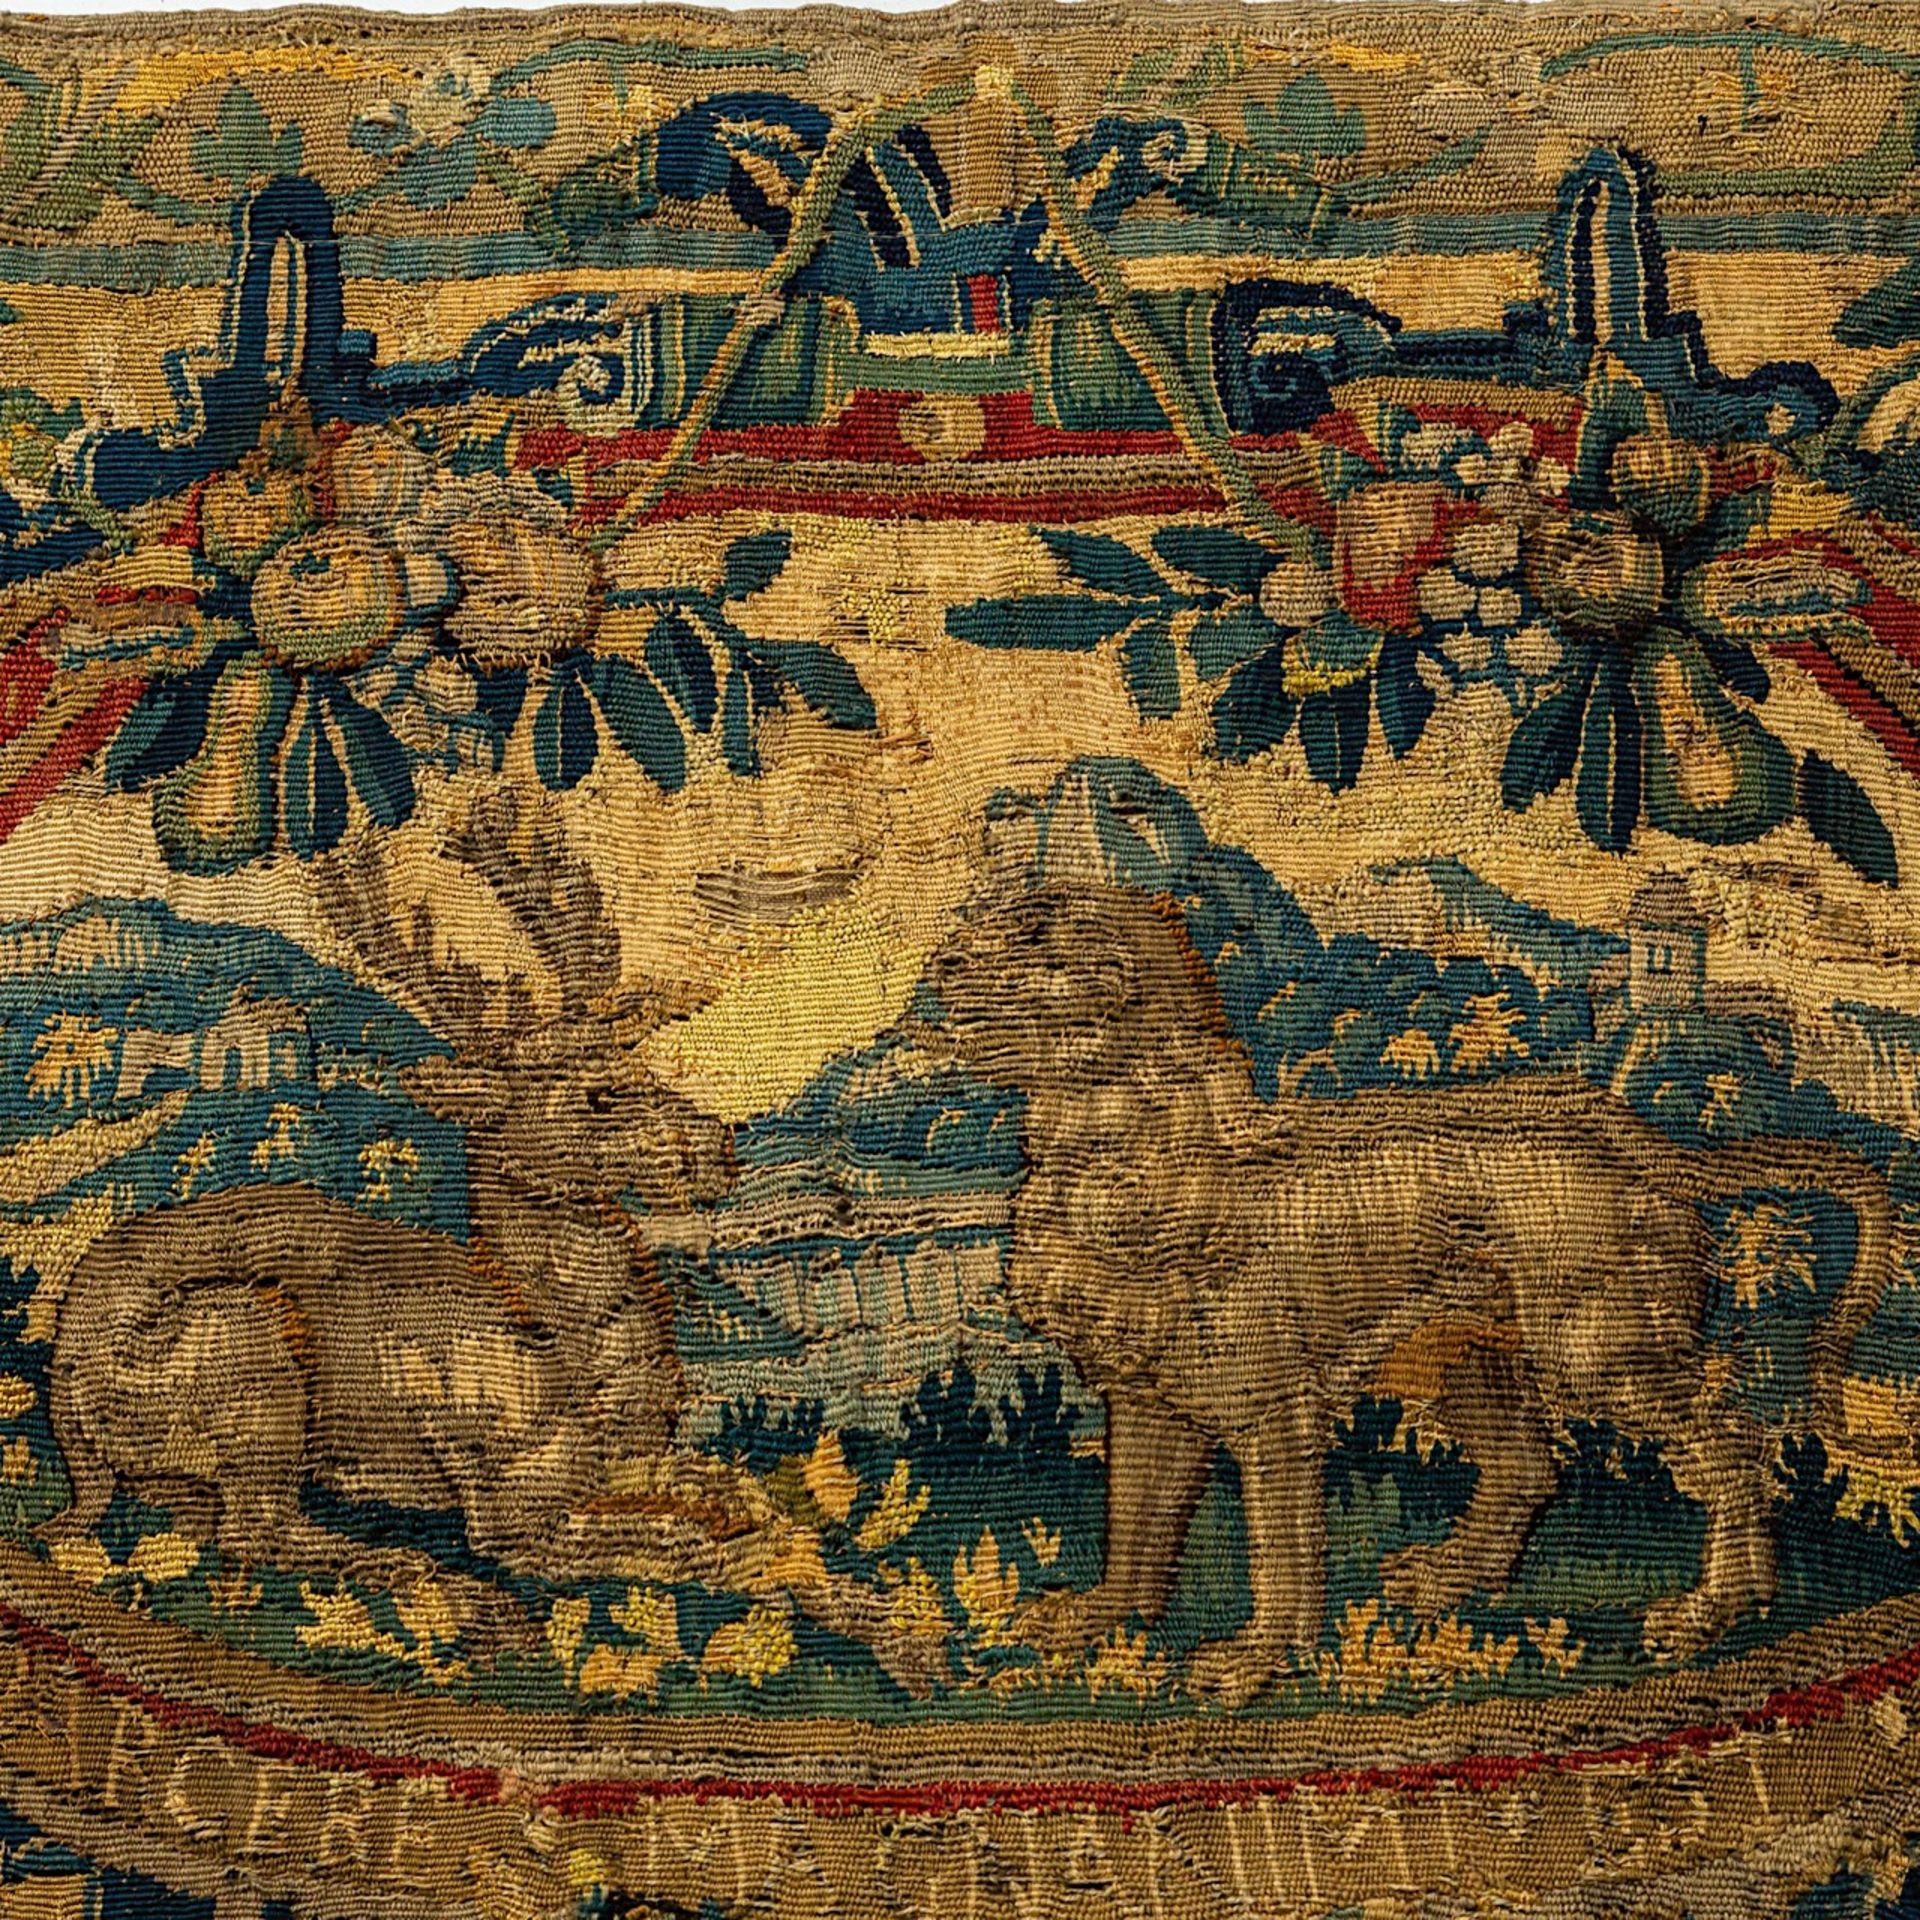 A 16thC Brussels wall tapestry depicting a battle scene, ca 1575-1585, 186 x 306 cm - Image 11 of 11